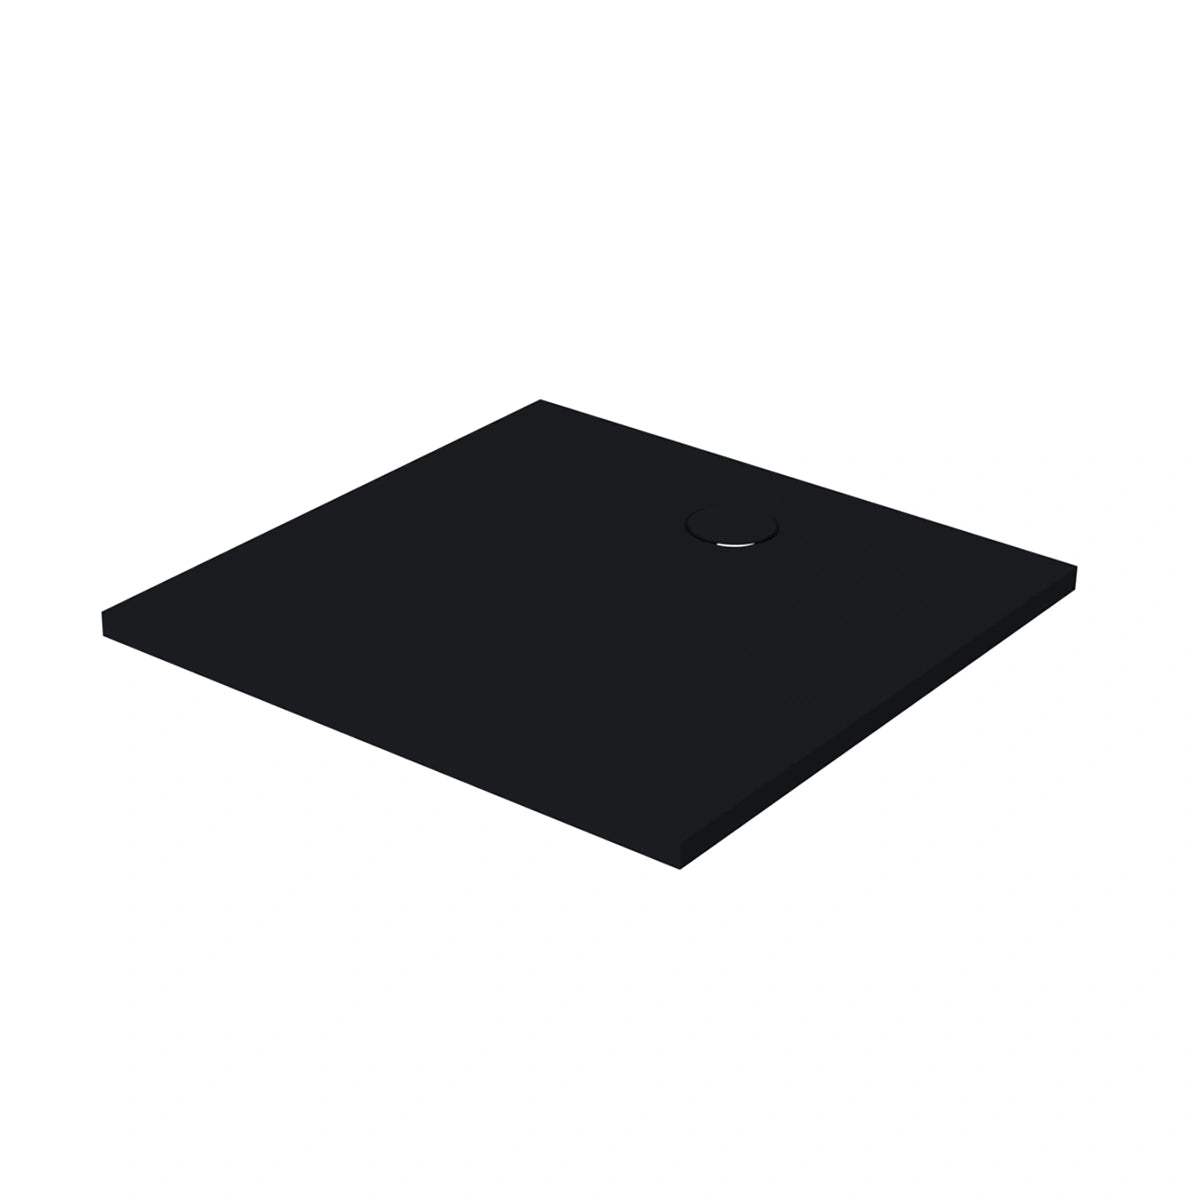 Shower base Shadow - 35.43 in. x 35.43 in. - black structure